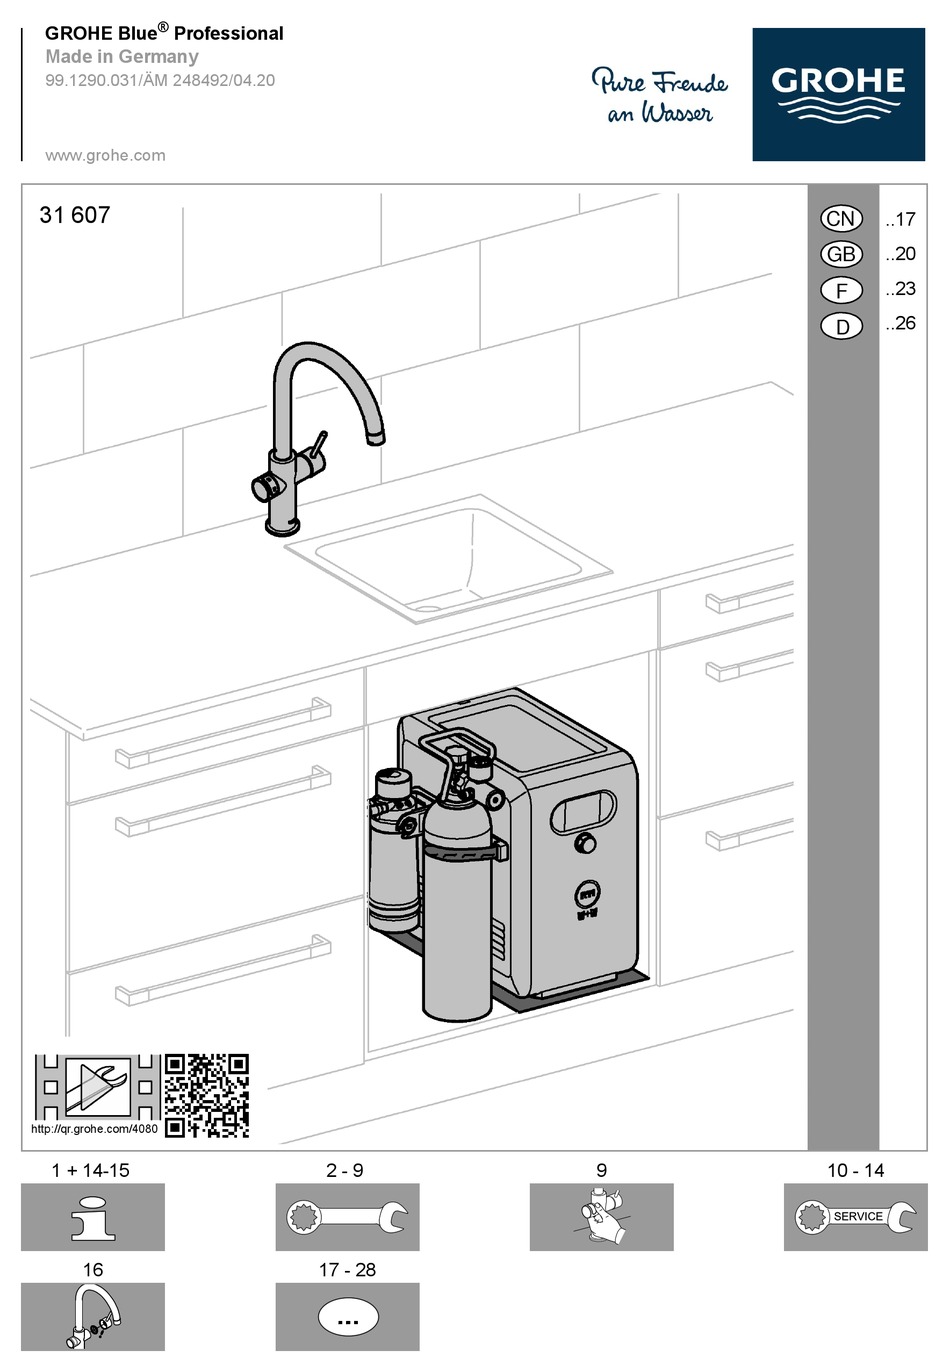 Installation And Commissioning; Maintenance And Cleaning - Grohe Blue  Professional 31 607 Manual [Page 22]